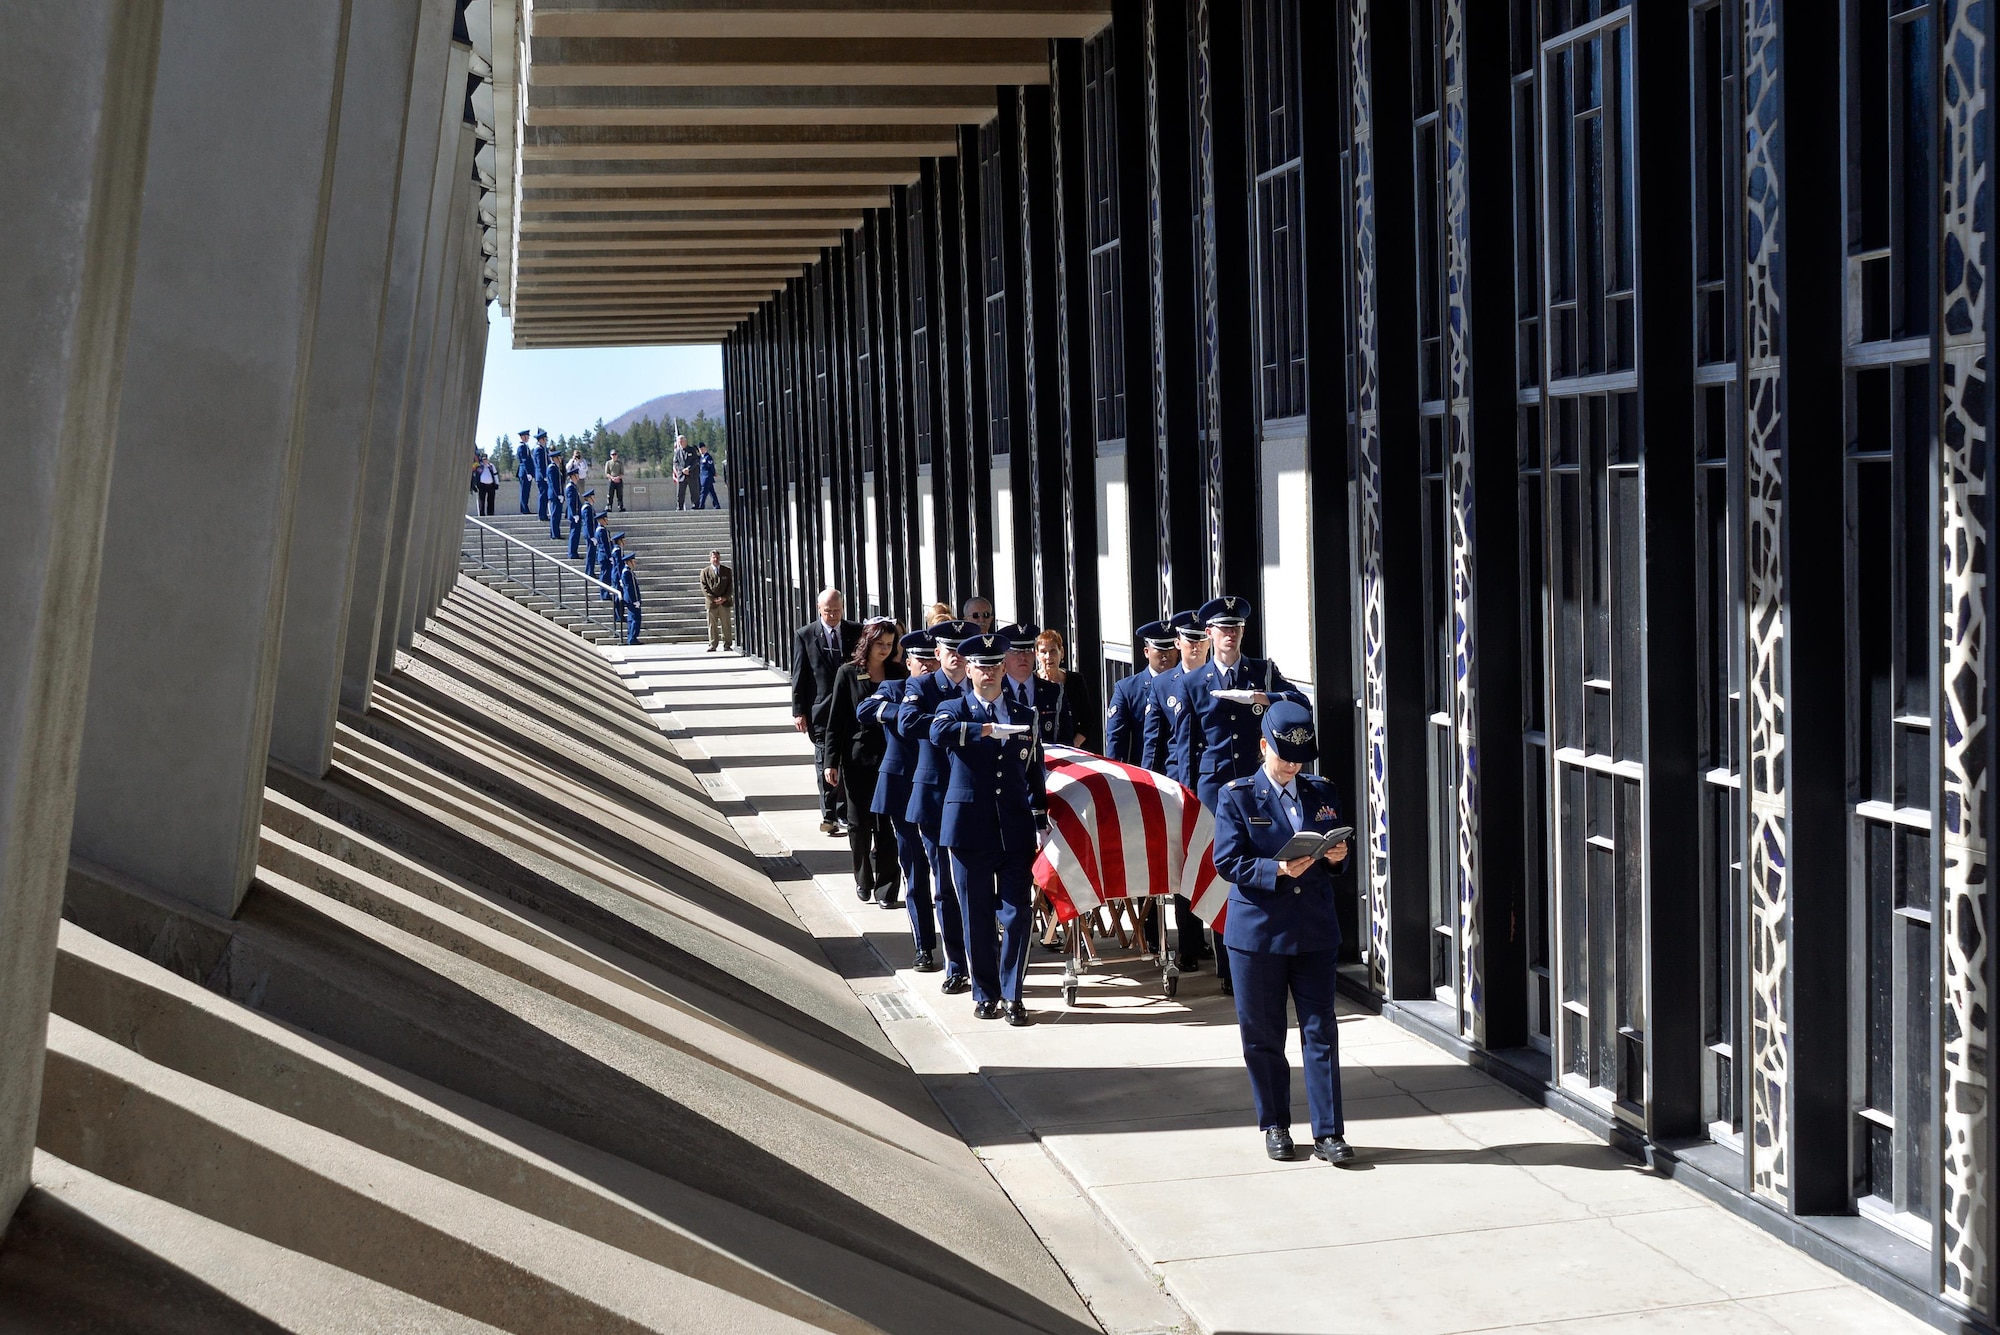 Rabbi (Maj.) Sarah Schechter, a Cadet Chapel Jewish chaplain, reads from the Torah while the honor guard escorts the casket containing the remains of Capt. Richard D. Chorlins, an Academy Class of ’67 graduate, into the Cadet Chapel at the U.S. Air Force Academy, Colo., April 14, 2015. Chorlins was killed in Vietnam in January 1970. His remains were transferred here April 13, 2015, in a dignified arrival ceremony and he was laid to rest at the Academy Cemetery April 14, 2015. (U.S. Air Force photo/Liz Copan)